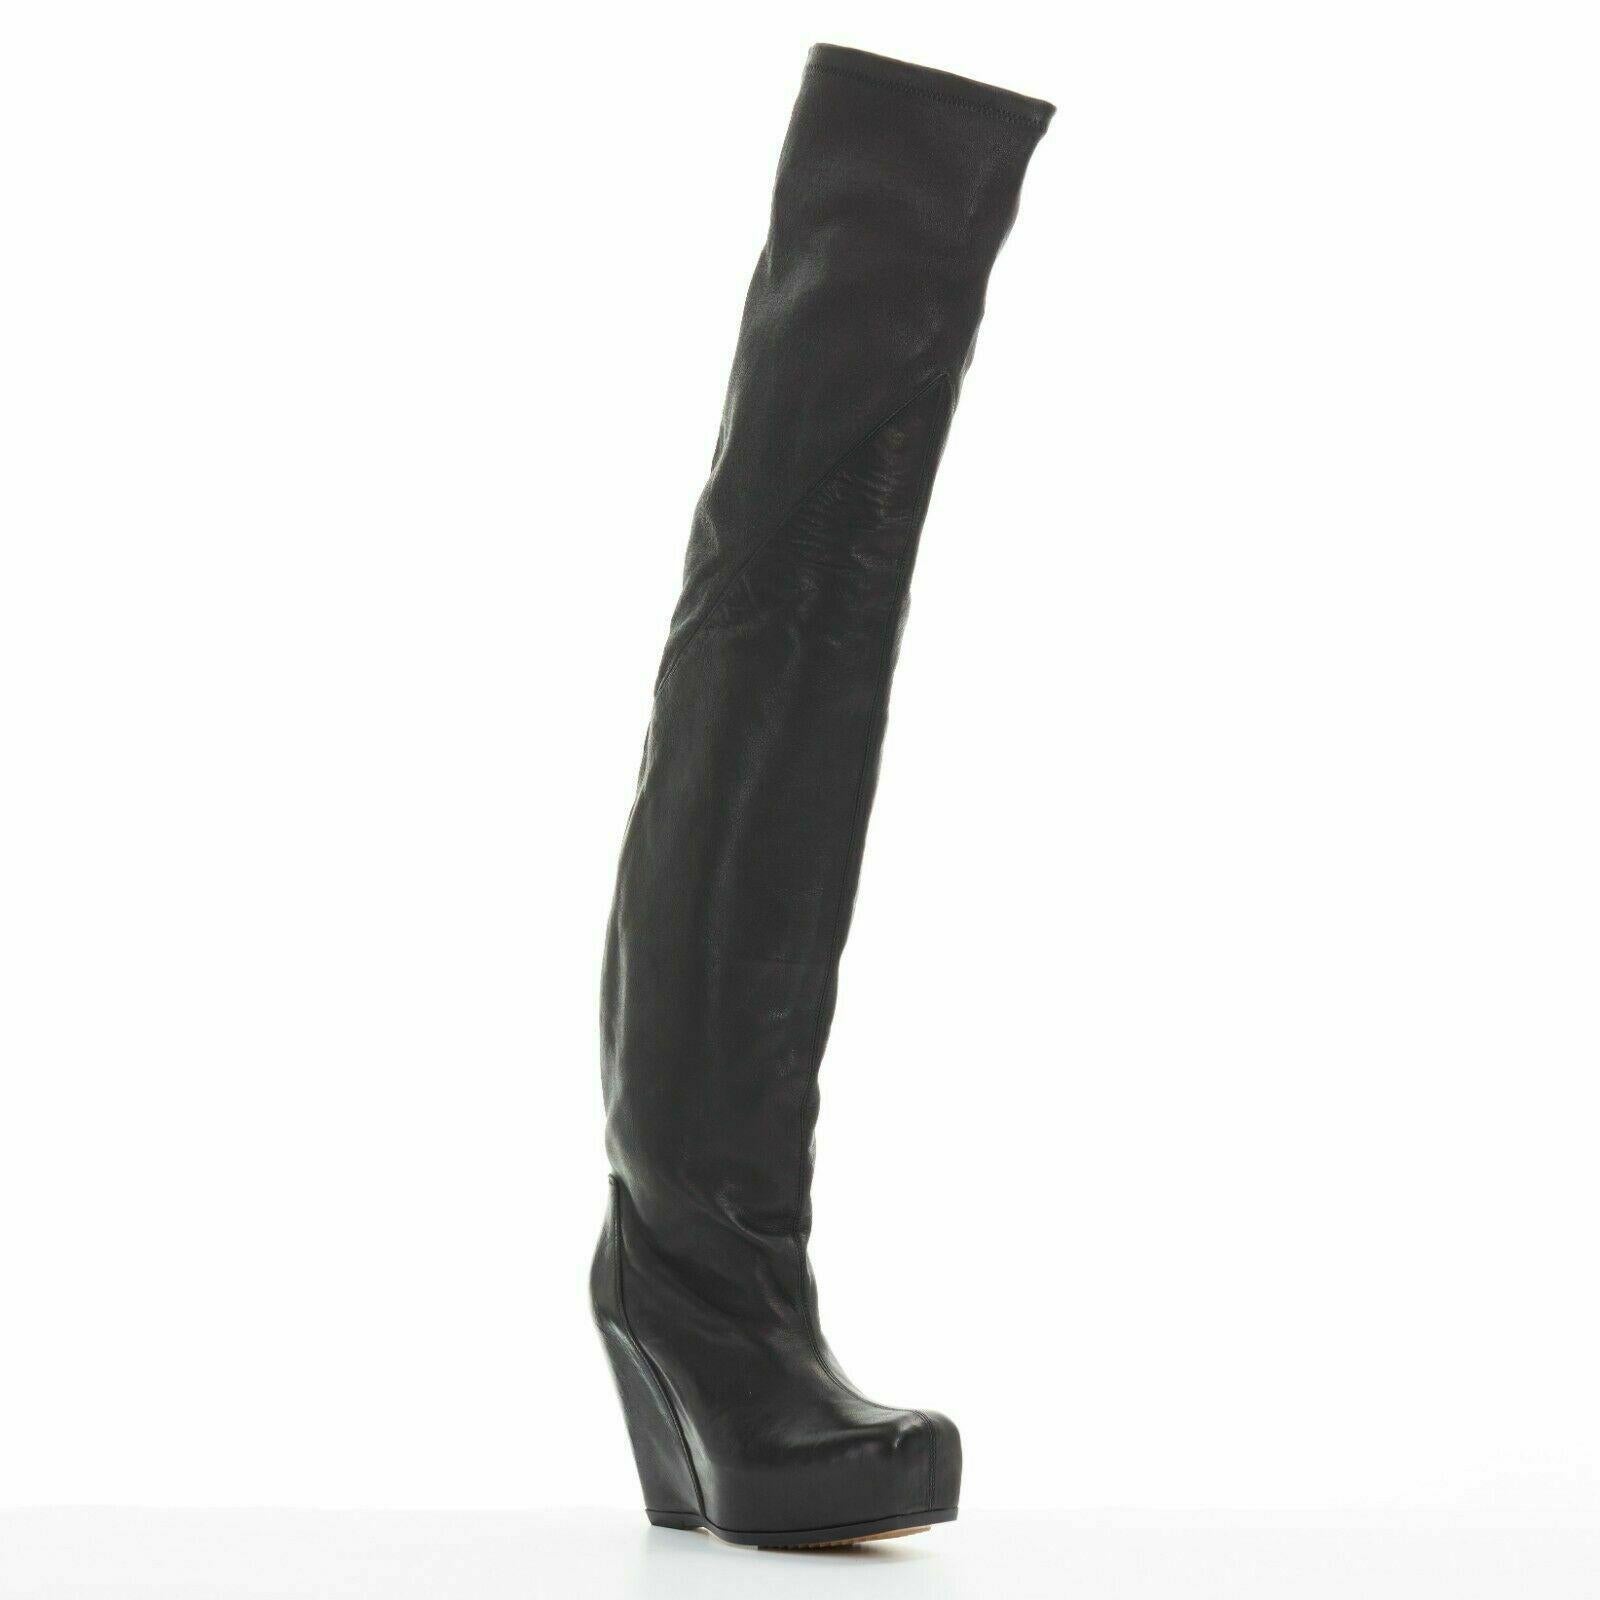 new RICK OWENS black leather square toe platform wedge knee high OTK boots EU36

RICK OWENS
New with box and dustbag. 
Black laether. 
Mixed leather. 
Stretch supple leather at opening. 
Stiffer leather shaft. 
Square toe design. 
Concealed platform